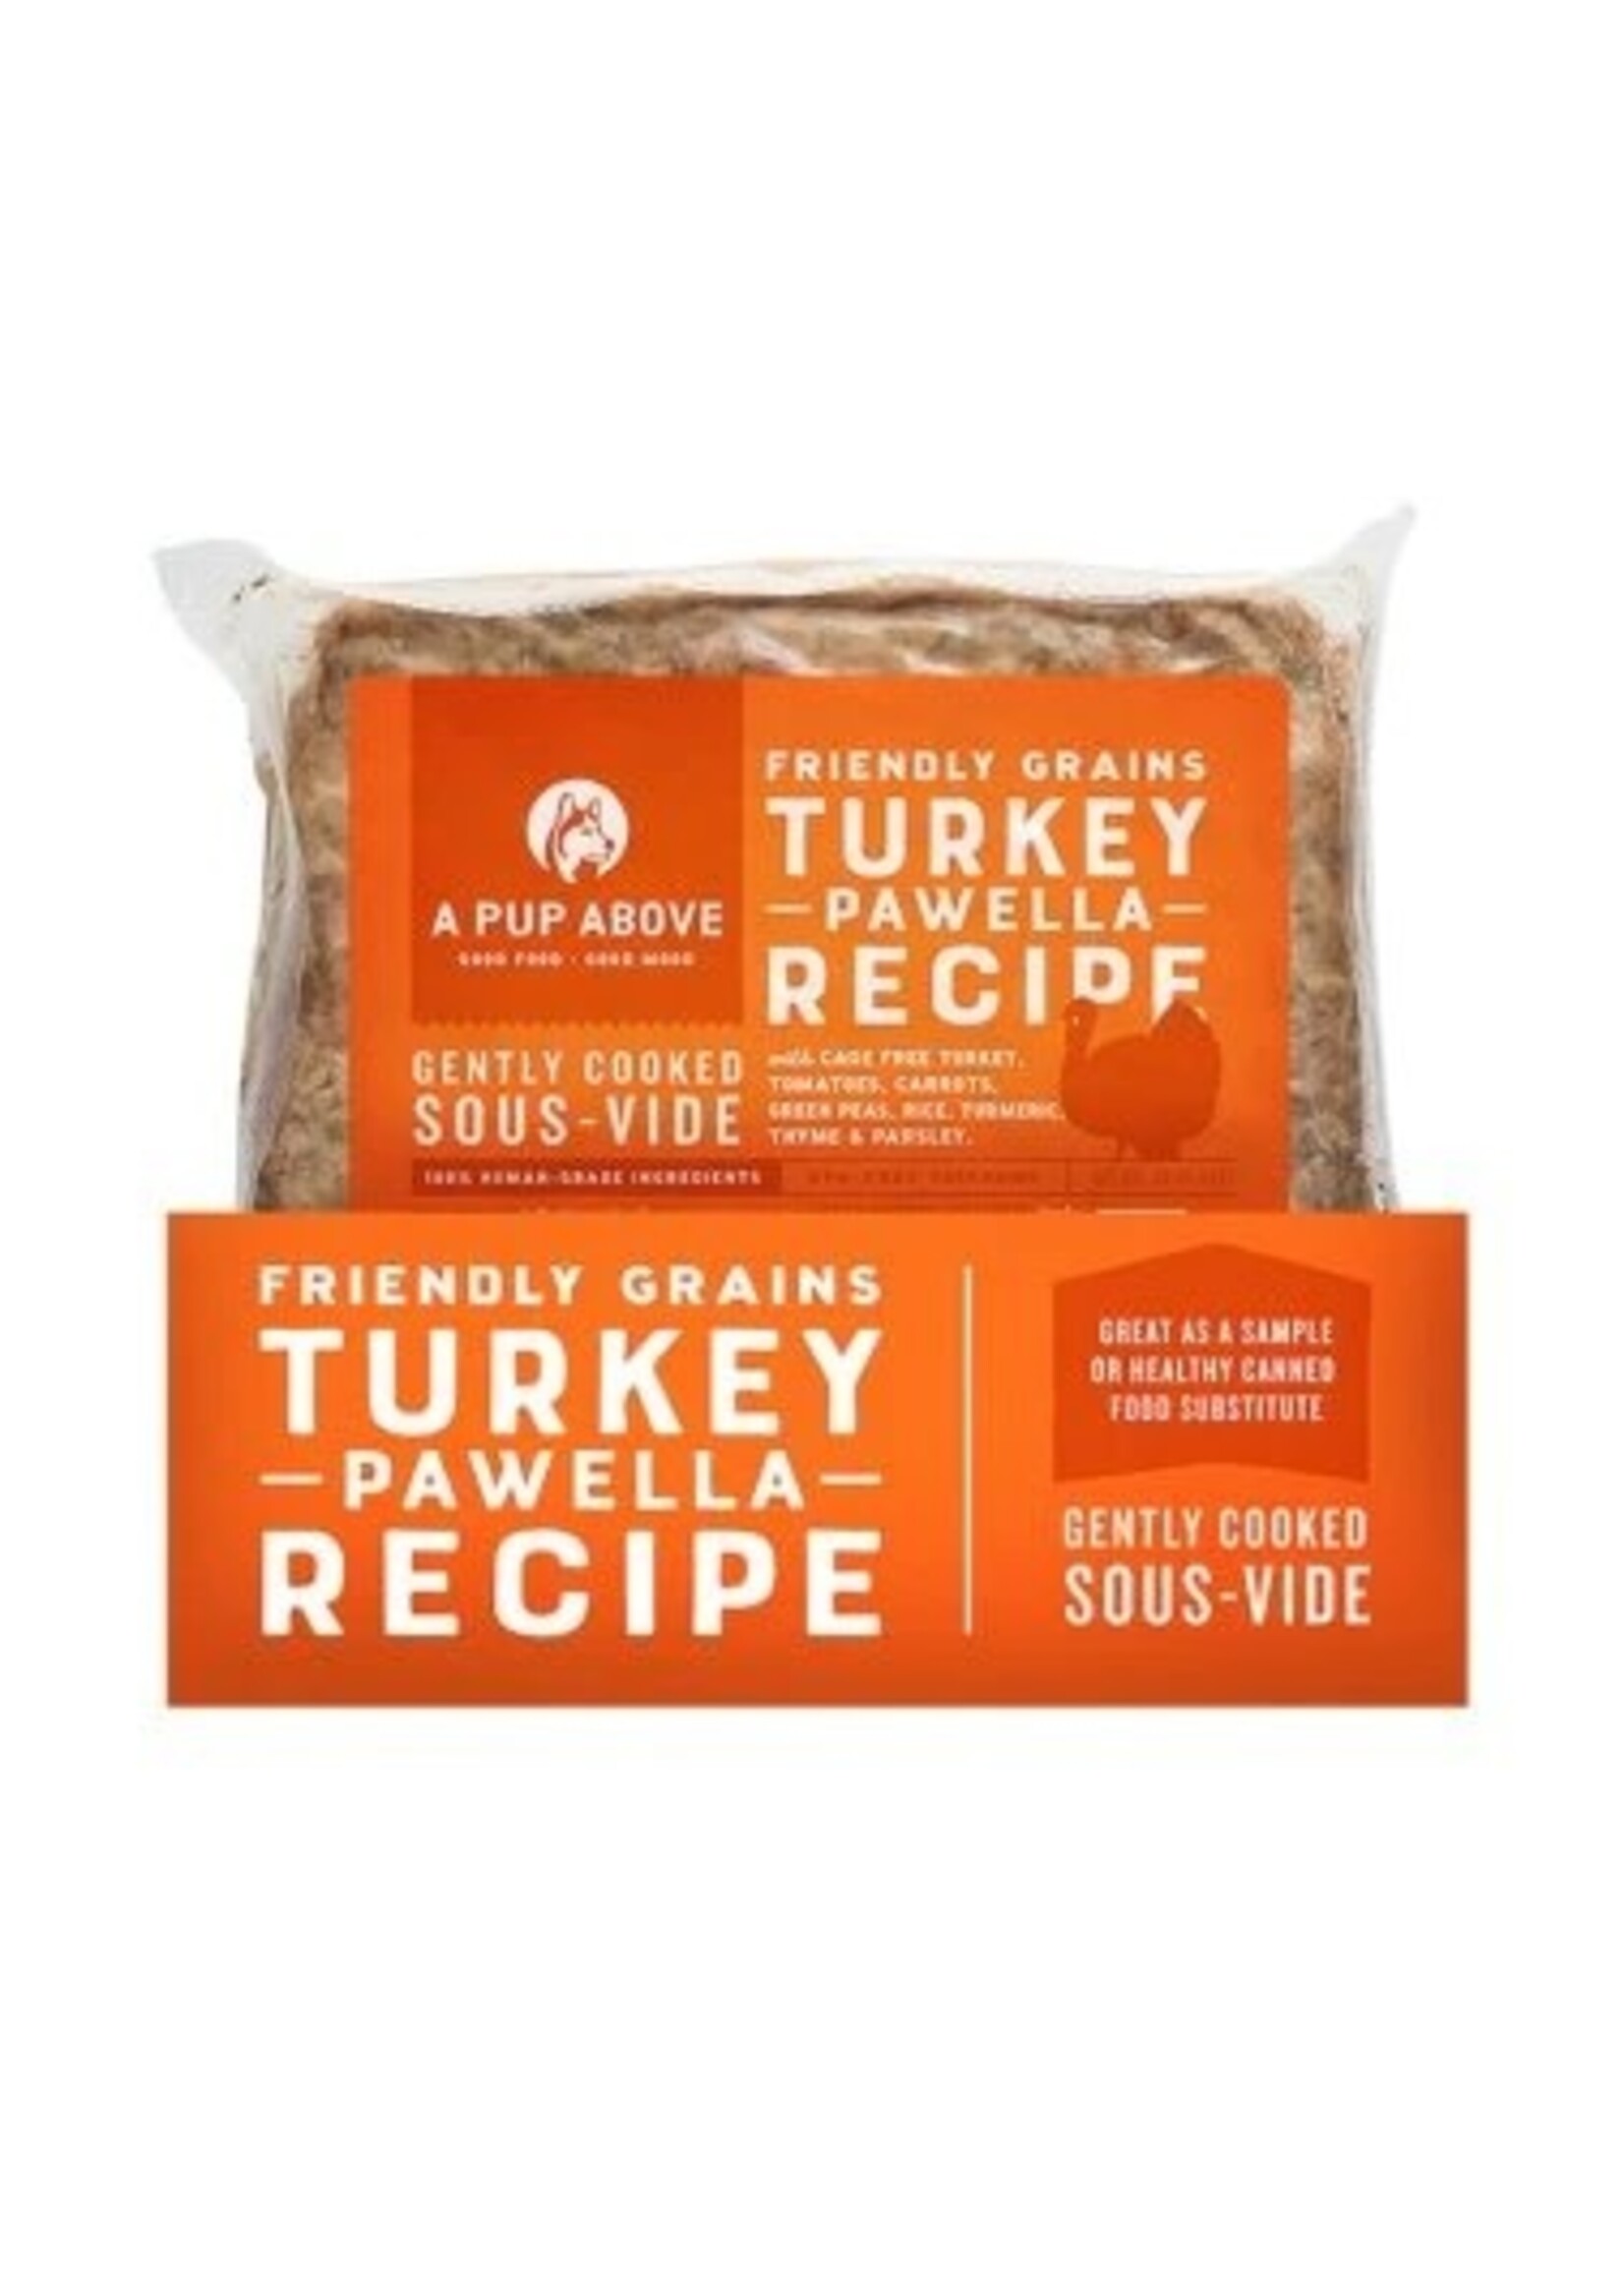 A Pup Above Turkey Pawella Gently Cooked Frozen Dog Food Turkey Recipe 1 lb